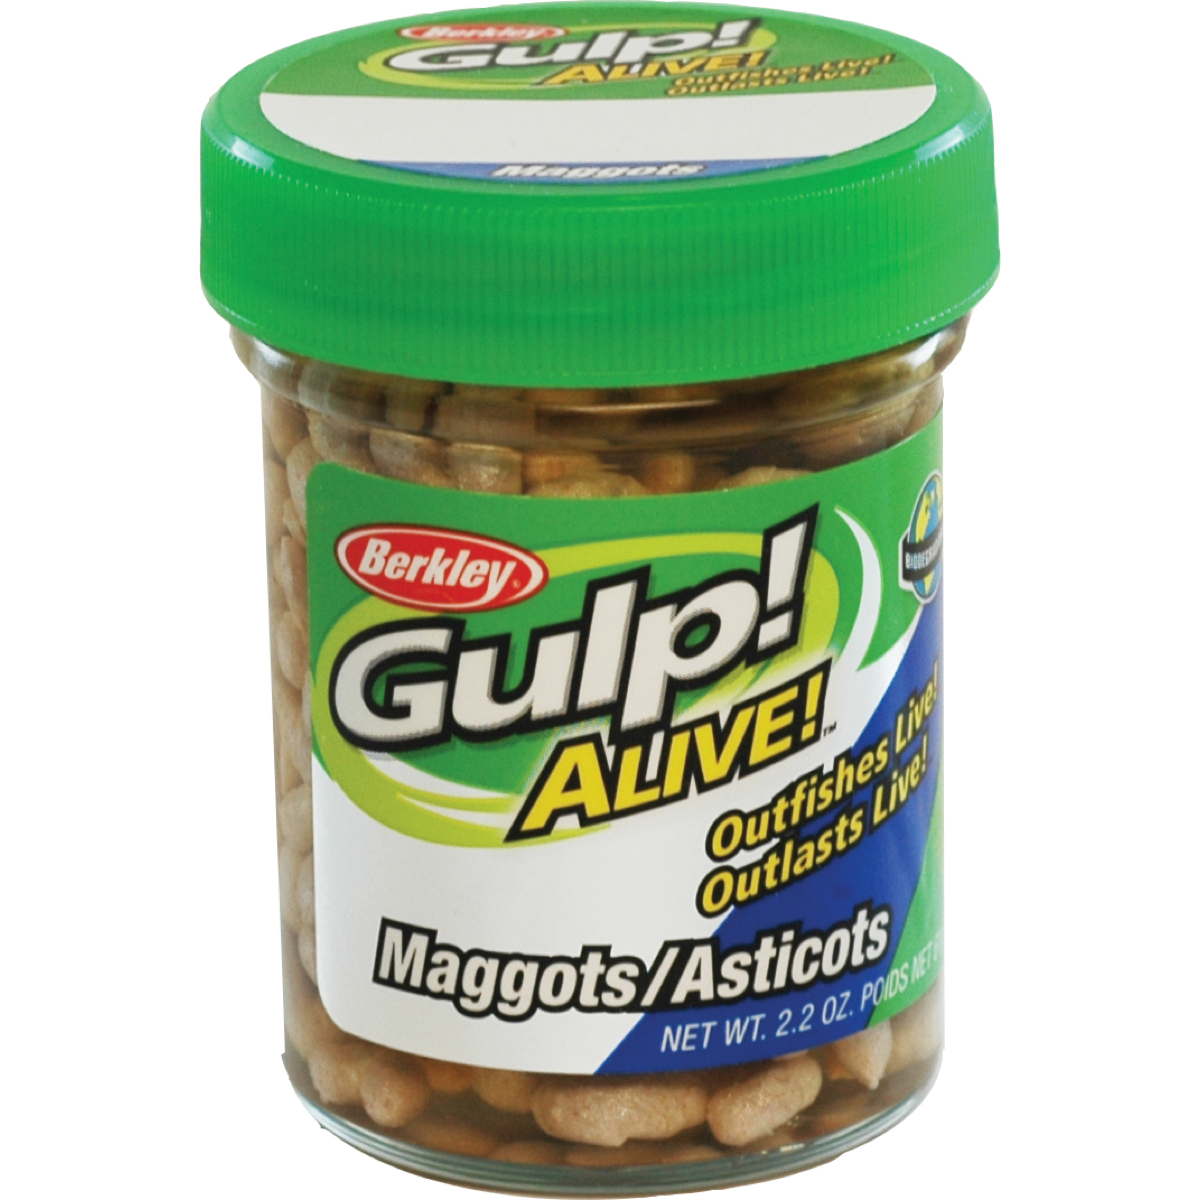 Photo of Berkley Gulp! Alive! Maggots for sale at United Tackle Shops.